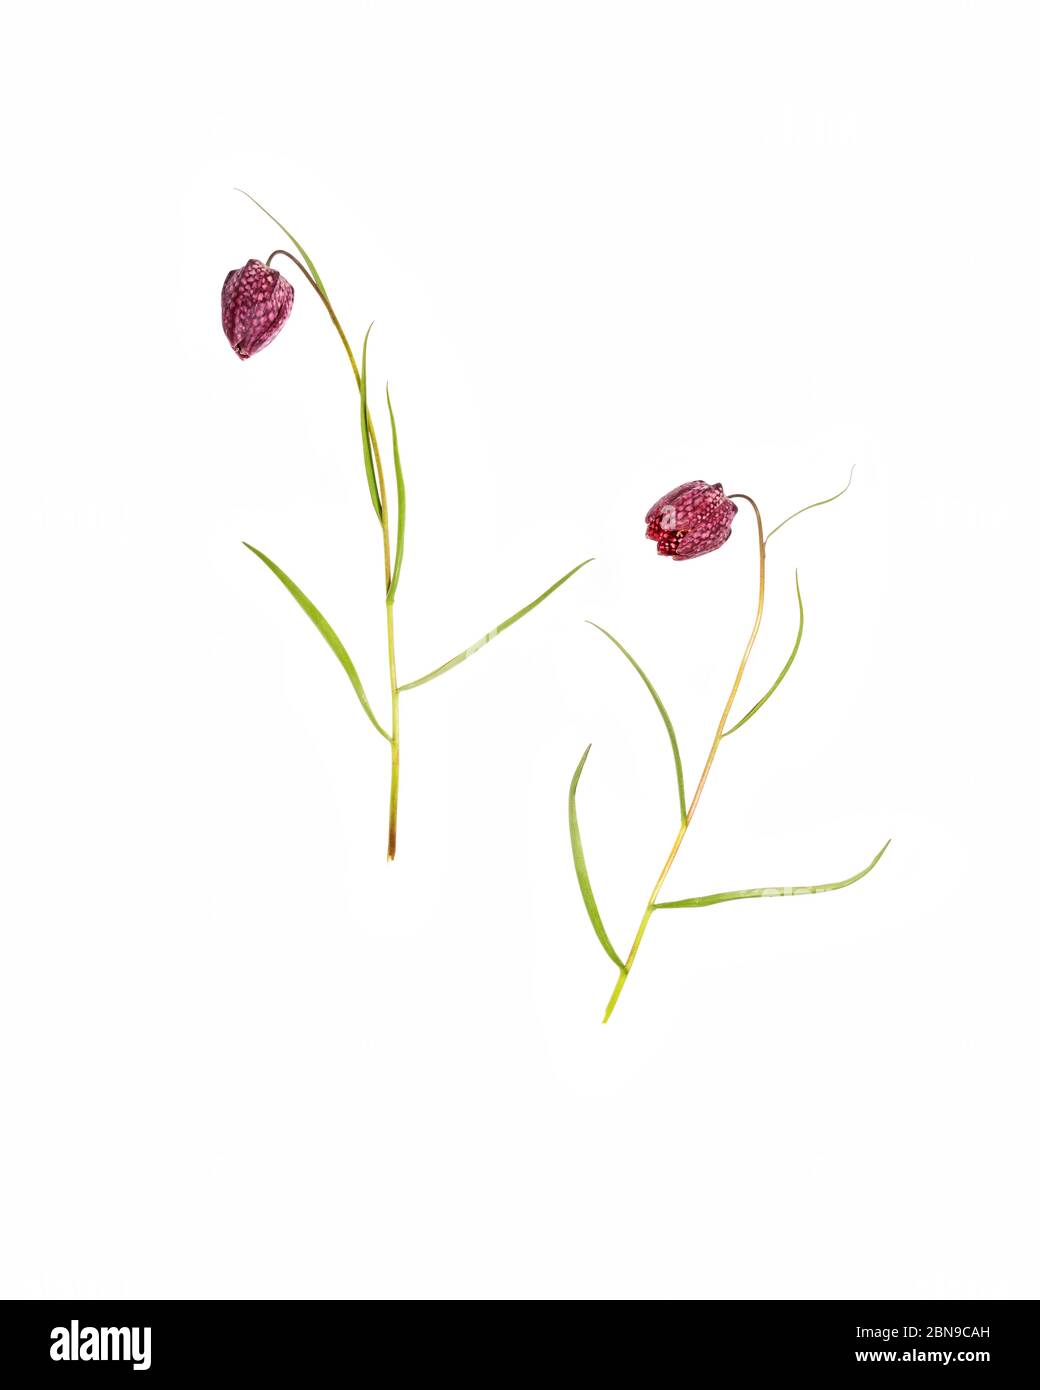 Snake's Head or Checkered Lily (Fritillaria meleagris) on a white background Stock Photo